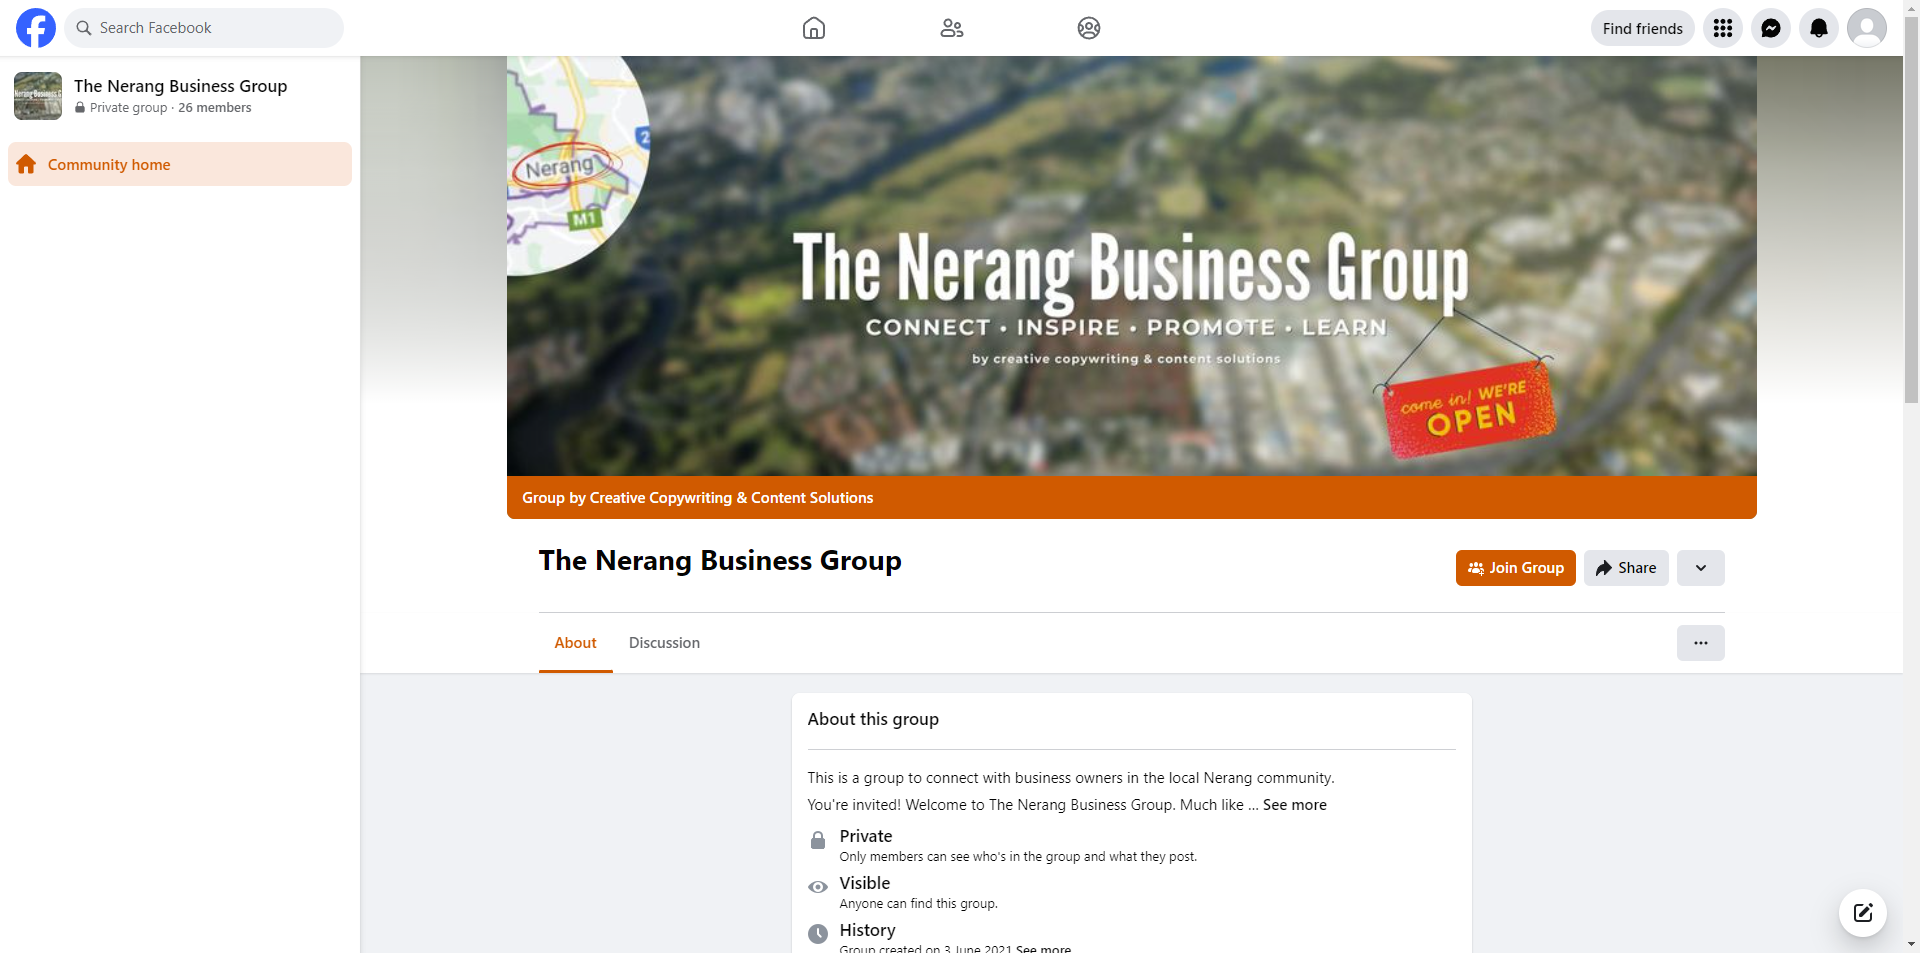 The Nerang Business Group